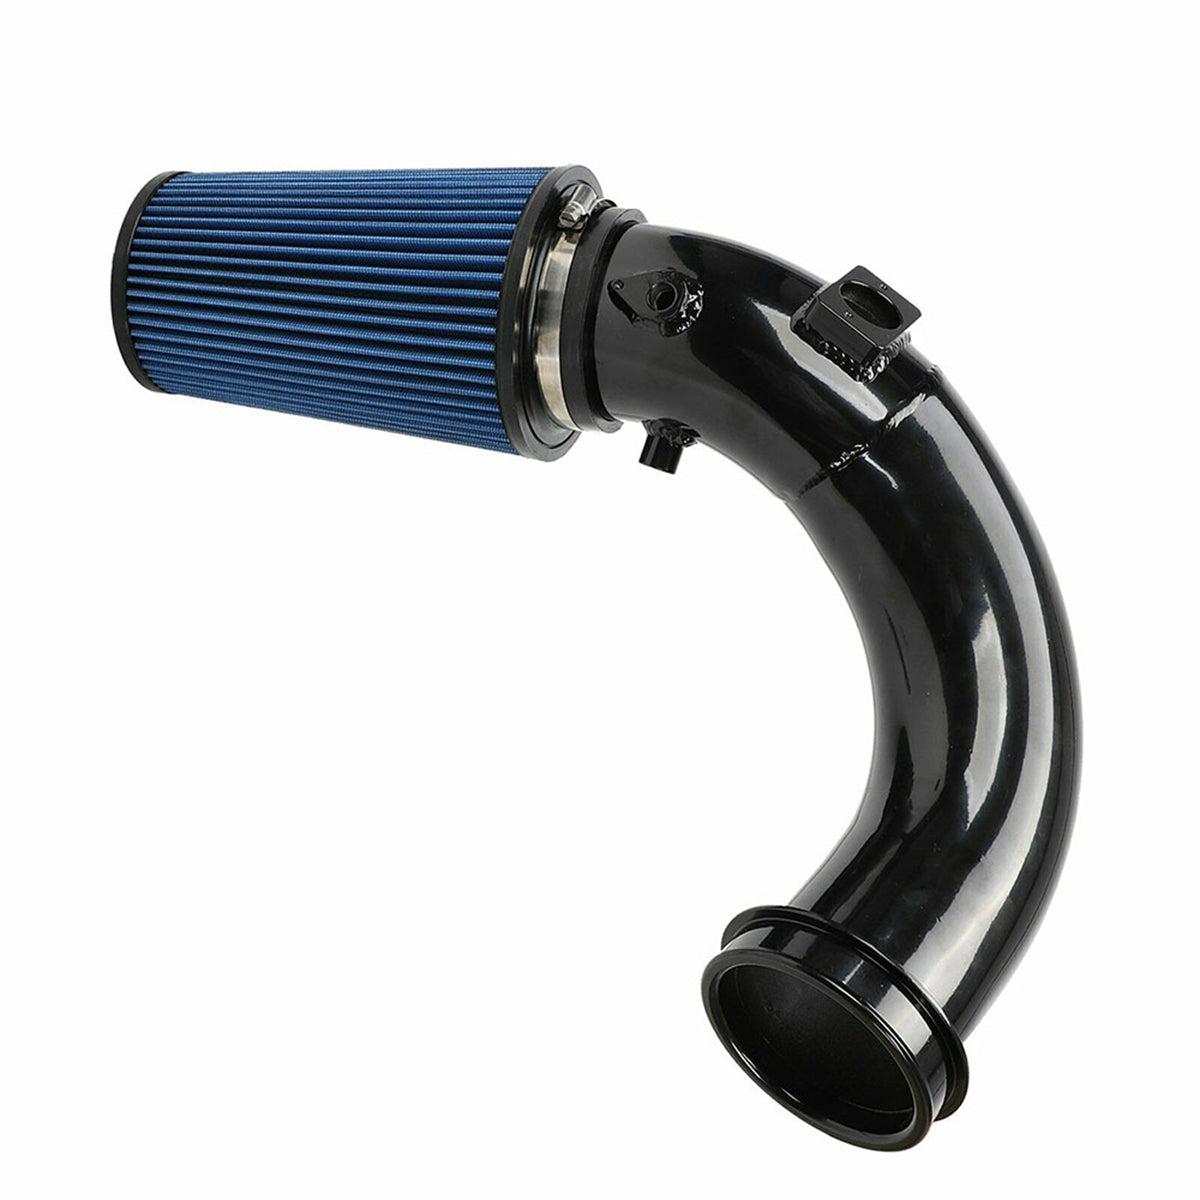 Daysyore® Black Cold Air Intake Kit With Oiled Filter for 2007-2012 Dodge Ram 6.7L Cummins Diesel